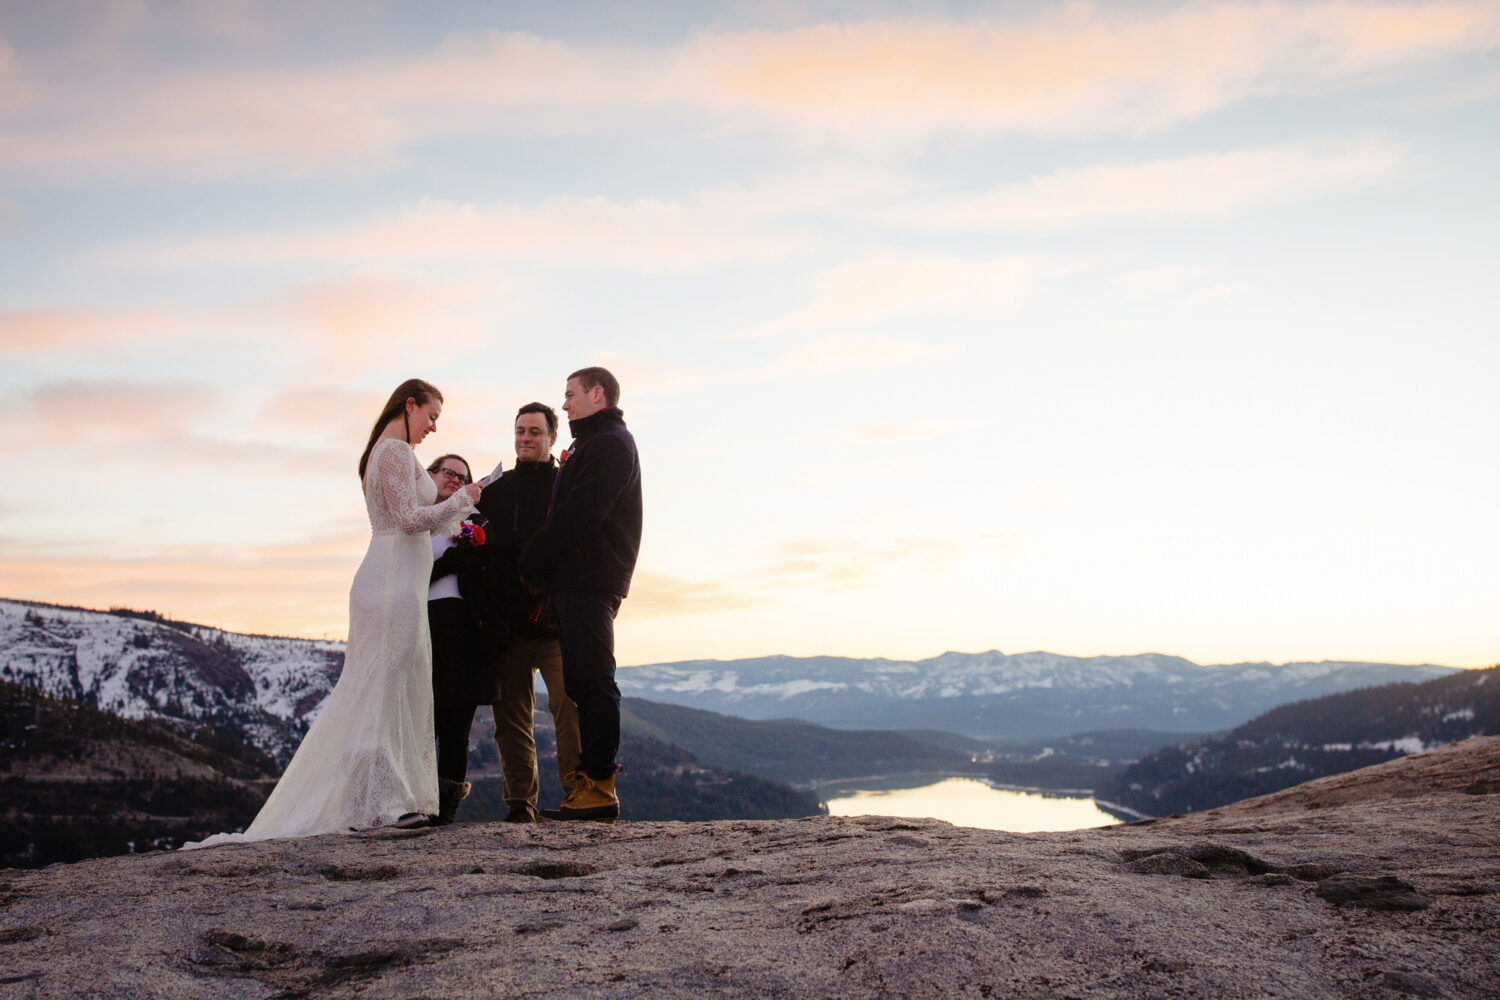 Exchanging vows during a wedding in Lake Tahoe on top of a mountain.